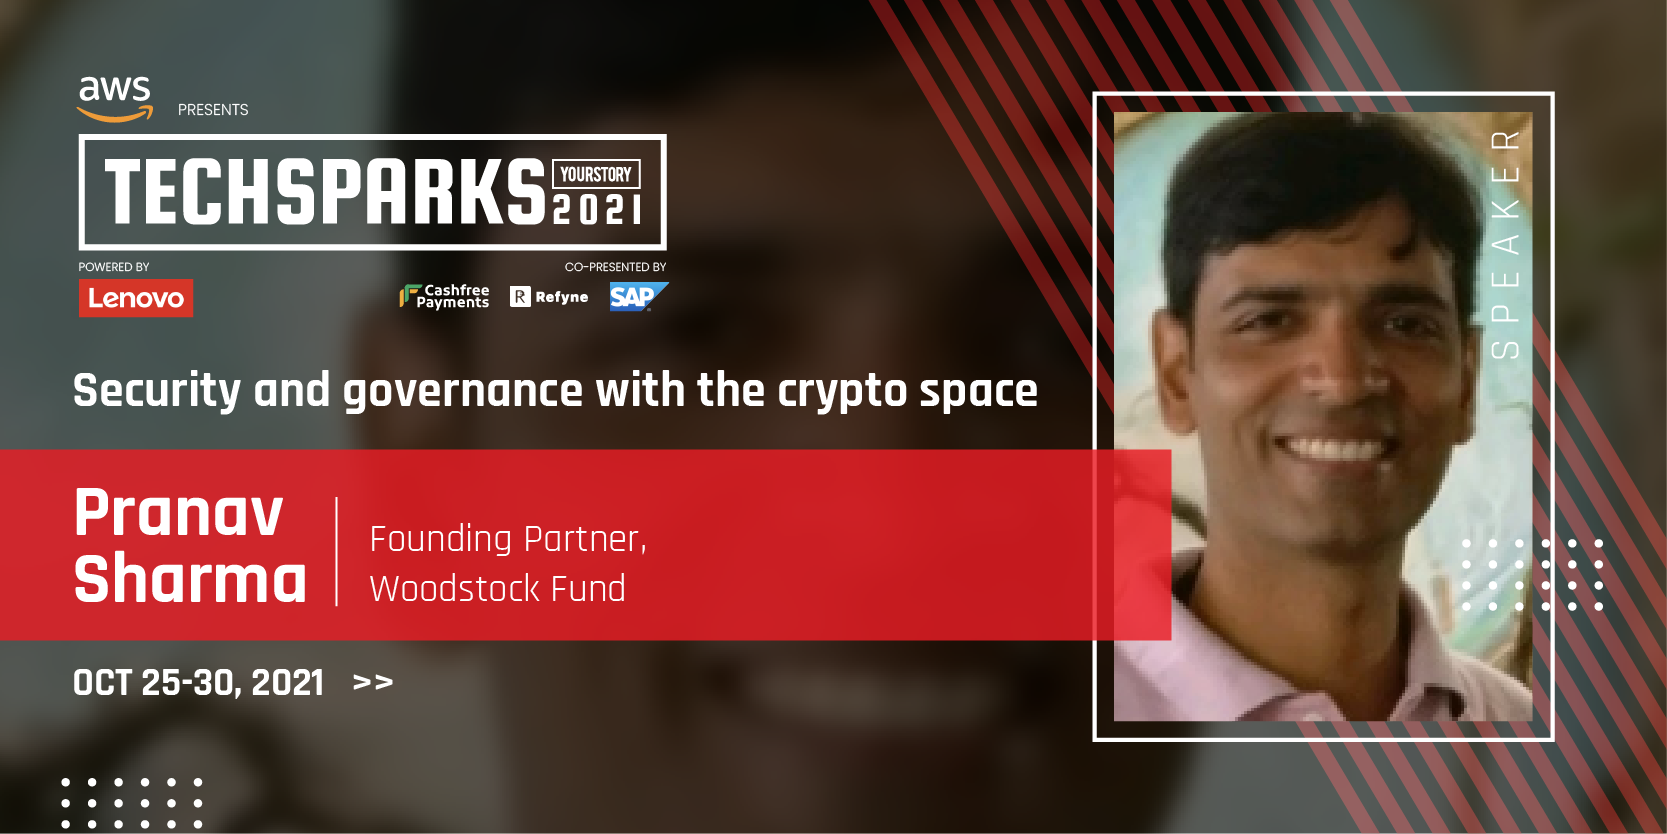 Woodstock Fund's Pranav Sharma explains how security, compliance work in crypto, blockchain at TechSparks 2021